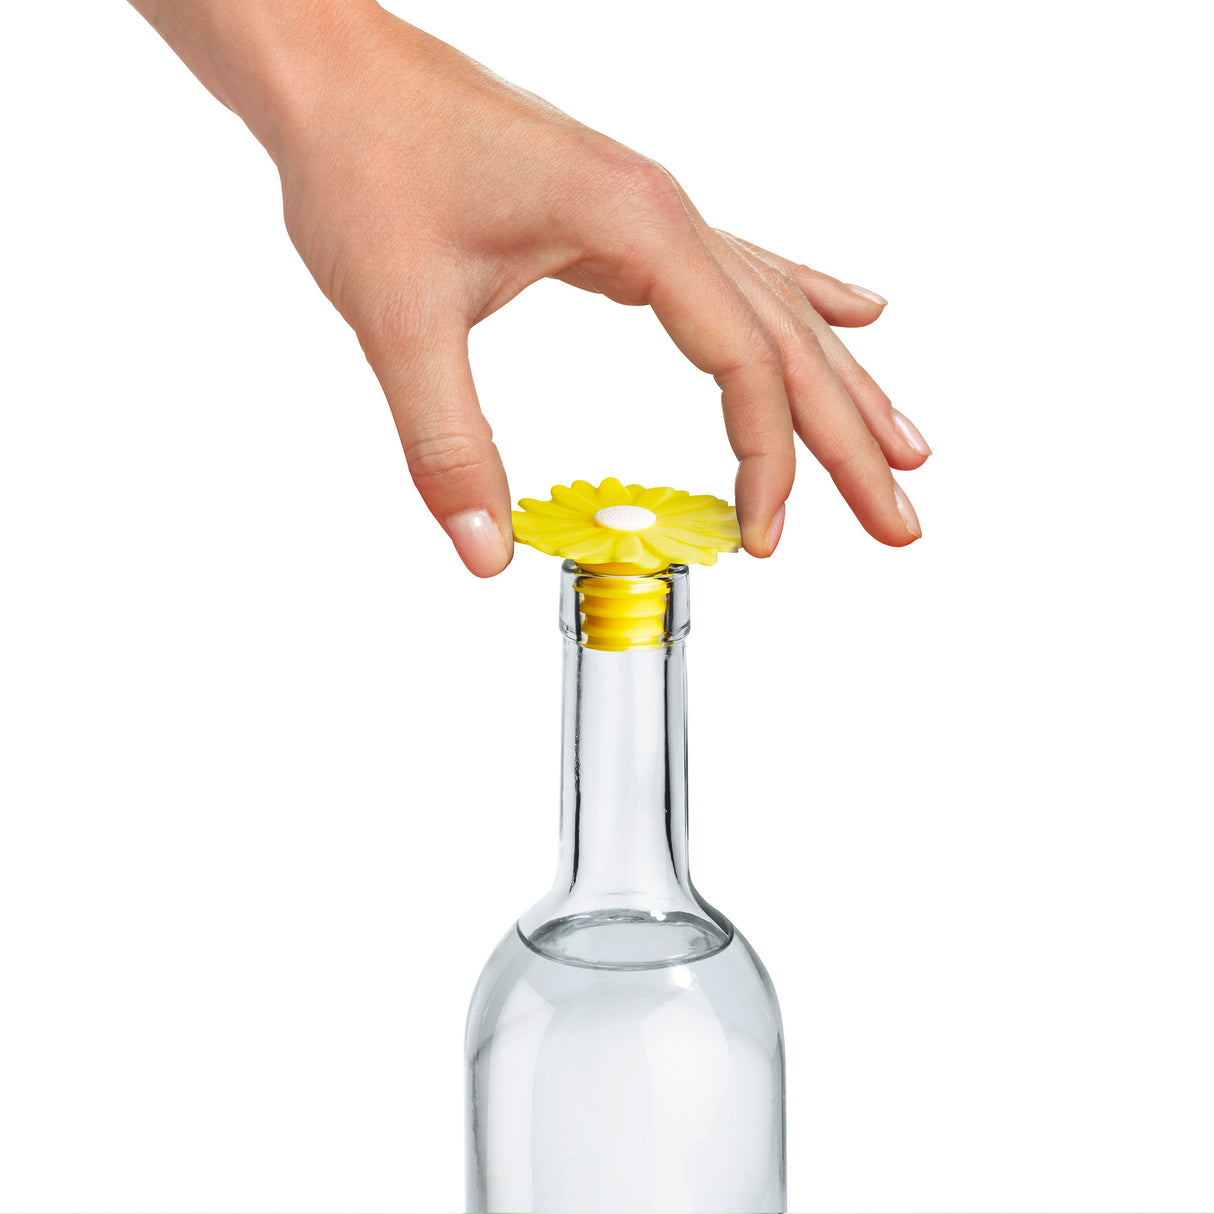 CHARLES-VIANCIN-3349-DAISY-BOTTLE-STOPPERS-24-YELLOW-SILICONE-HANDLE.jpg